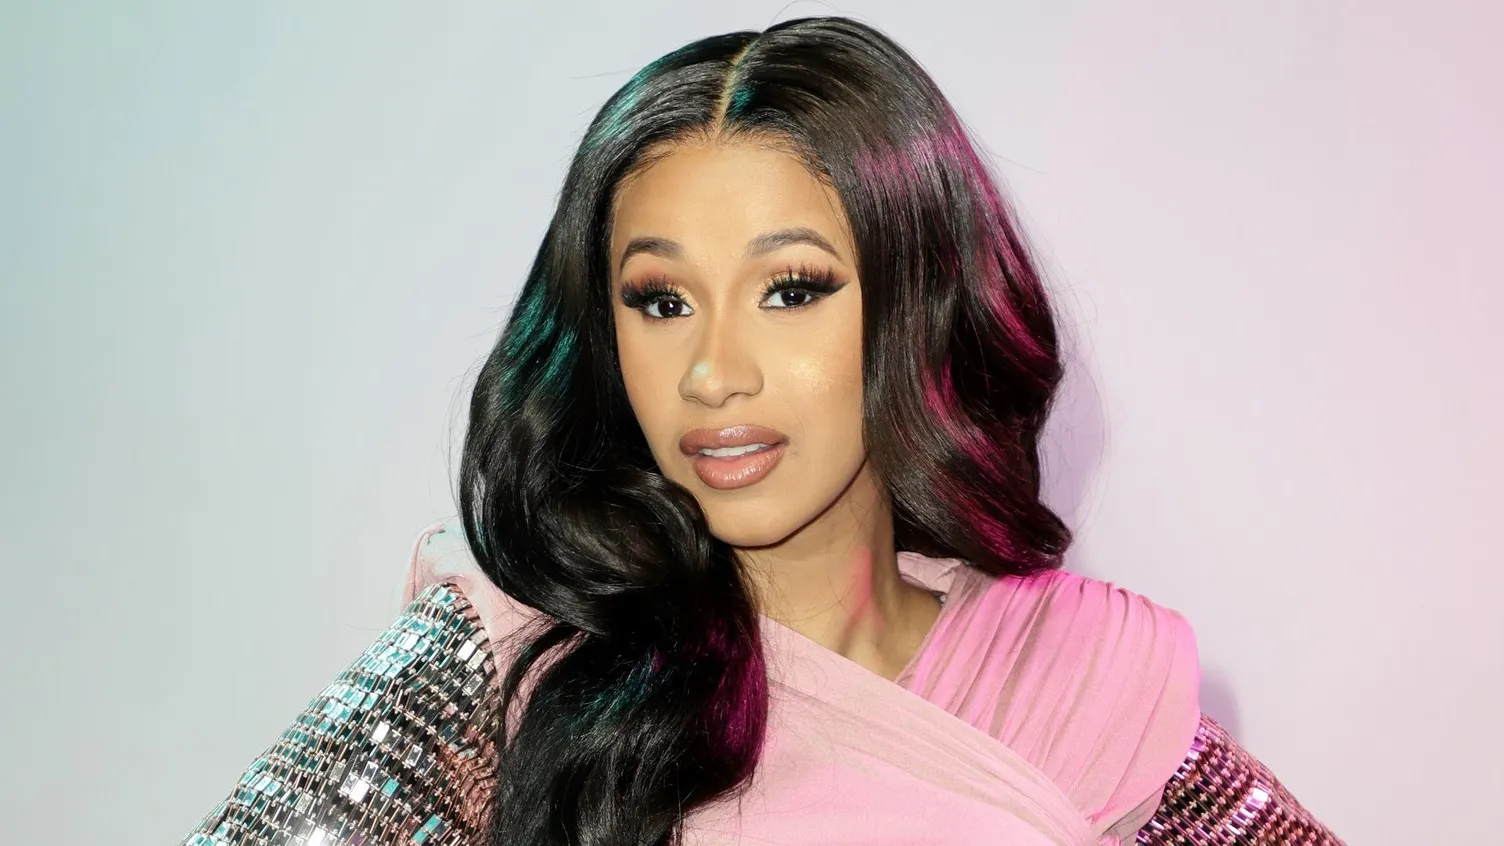 cardi-b-disclosed-reasons-for-stopping-talking-about-her-life-via-music